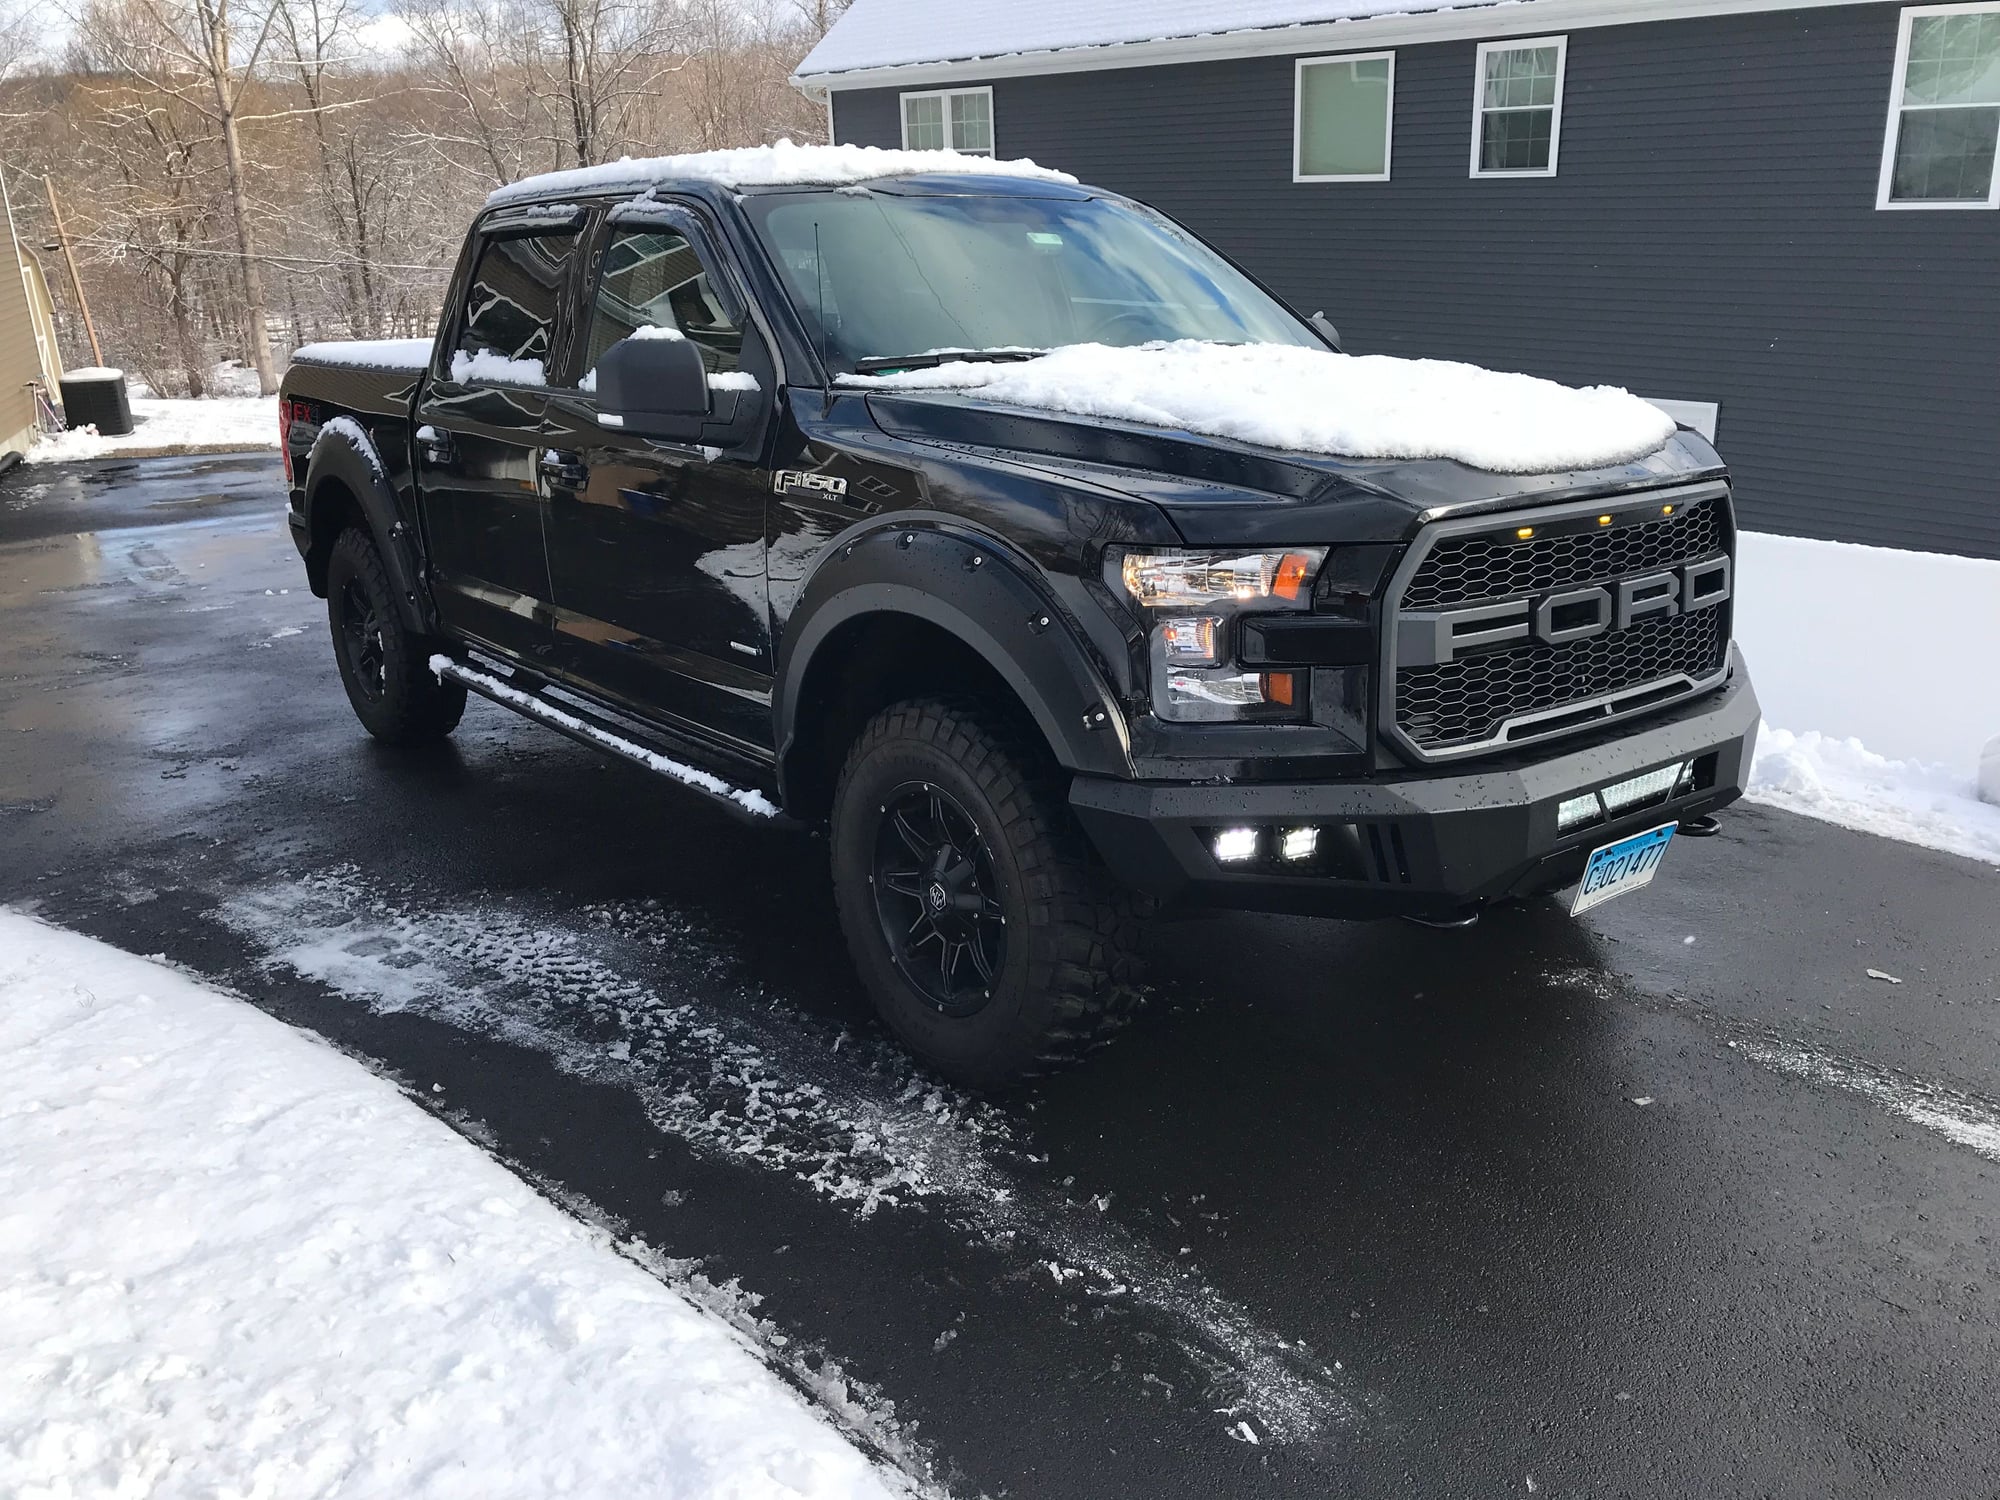 2015 F150 XLT evolution - Page 2 - Ford F150 Forum - Community of Ford ...